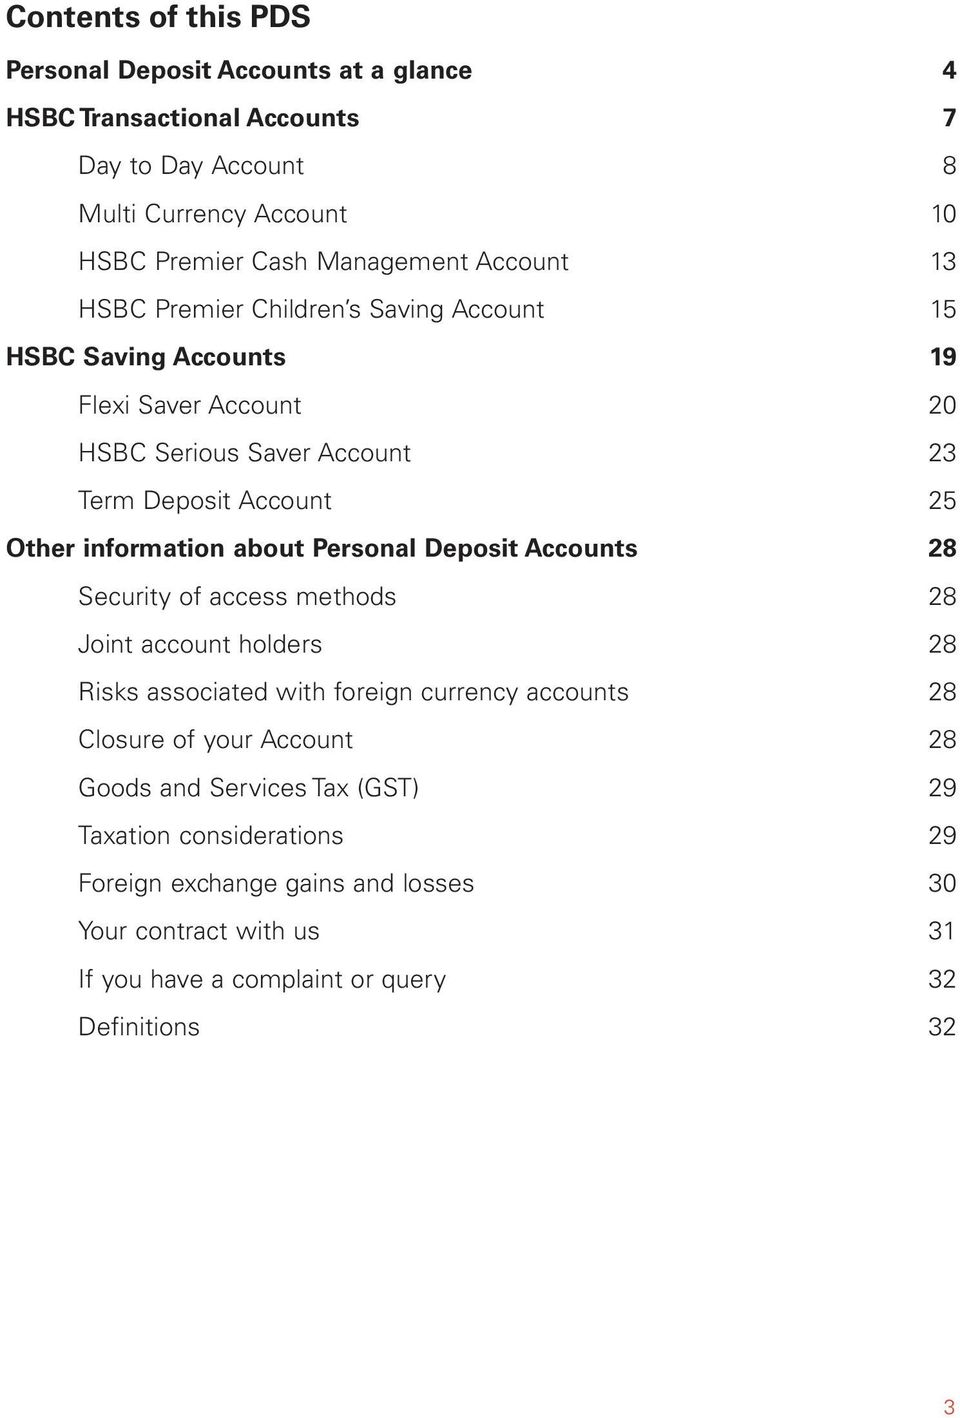 information about Personal Deposit Accounts 28 Security of access methods 28 Joint account holders 28 Risks associated with foreign currency accounts 28 Closure of your